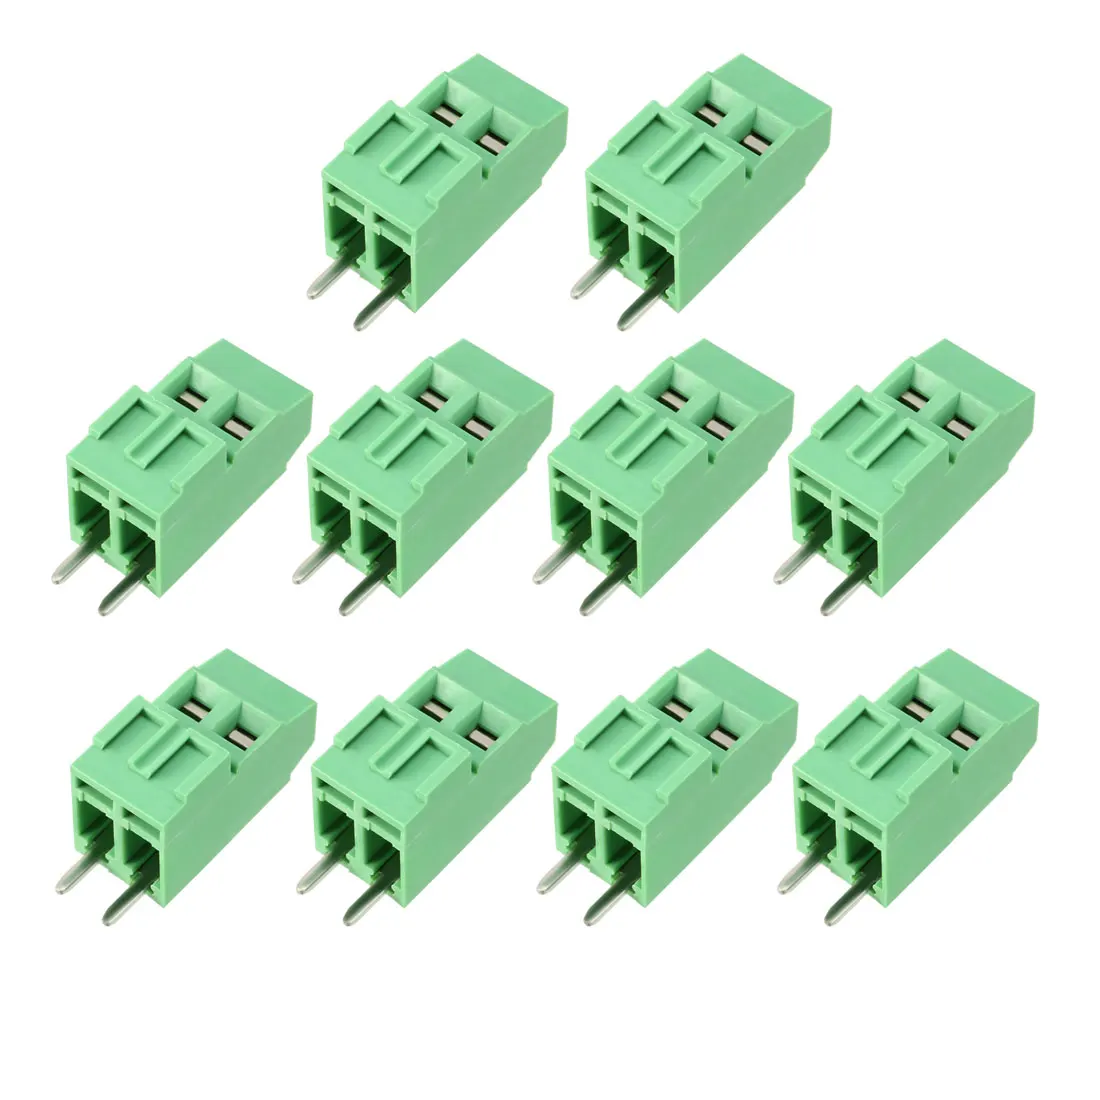 uxcell 20Pcs AC 300V 15A 5.08mm Pitch 2P Flat Angle Needle Seat Plug-In PCB Terminal Block Connector 